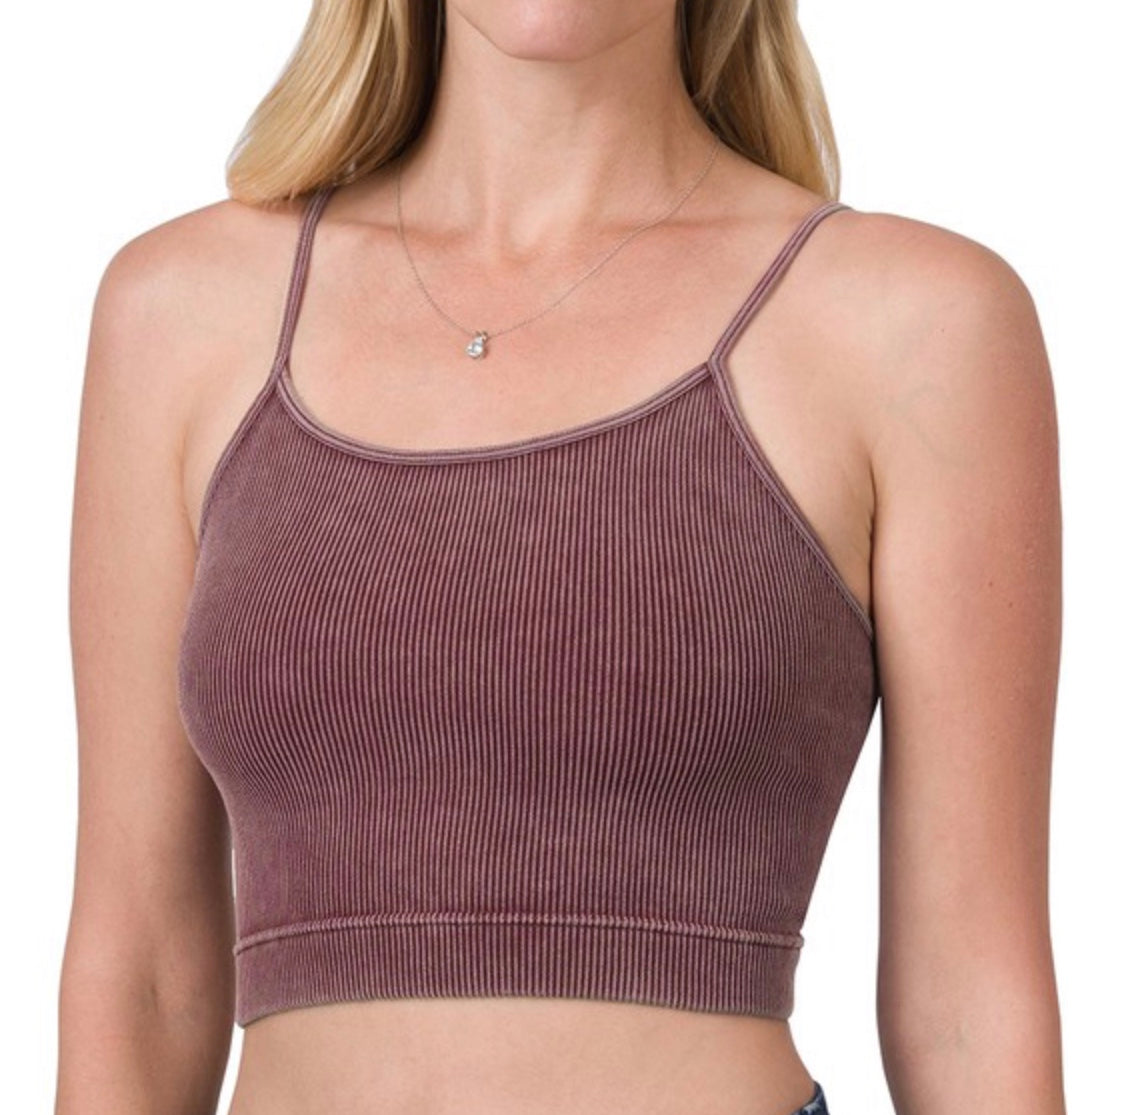 Washed cropped tanks